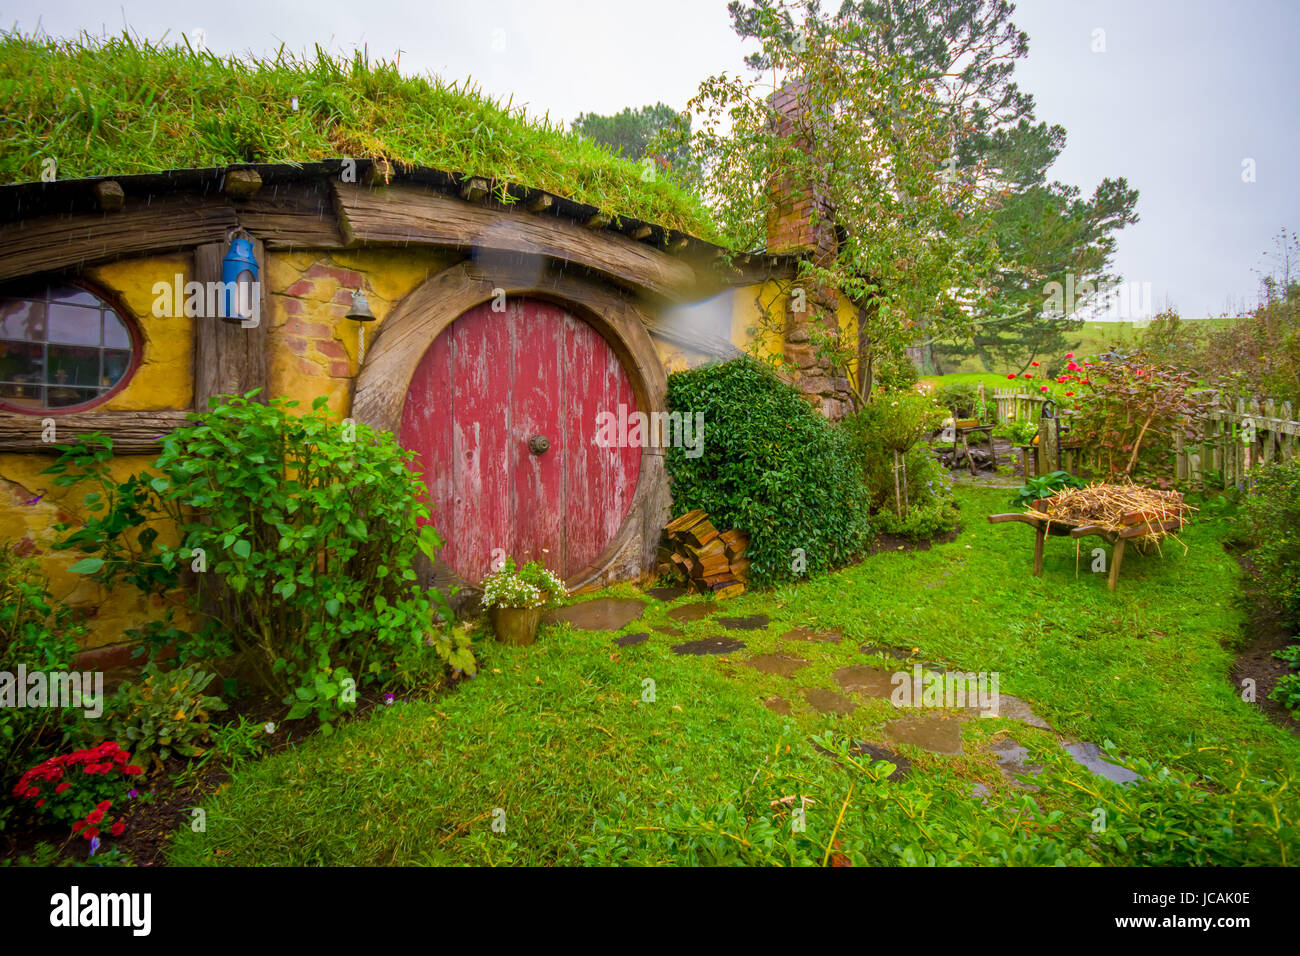 NORTH ISLAND, NEW ZEALAND- MAY 16, 2017: Hobbit house with red door, hobbiton movie set, site made for movies: Hobbit and Lord of the ring in Matamata Stock Photo